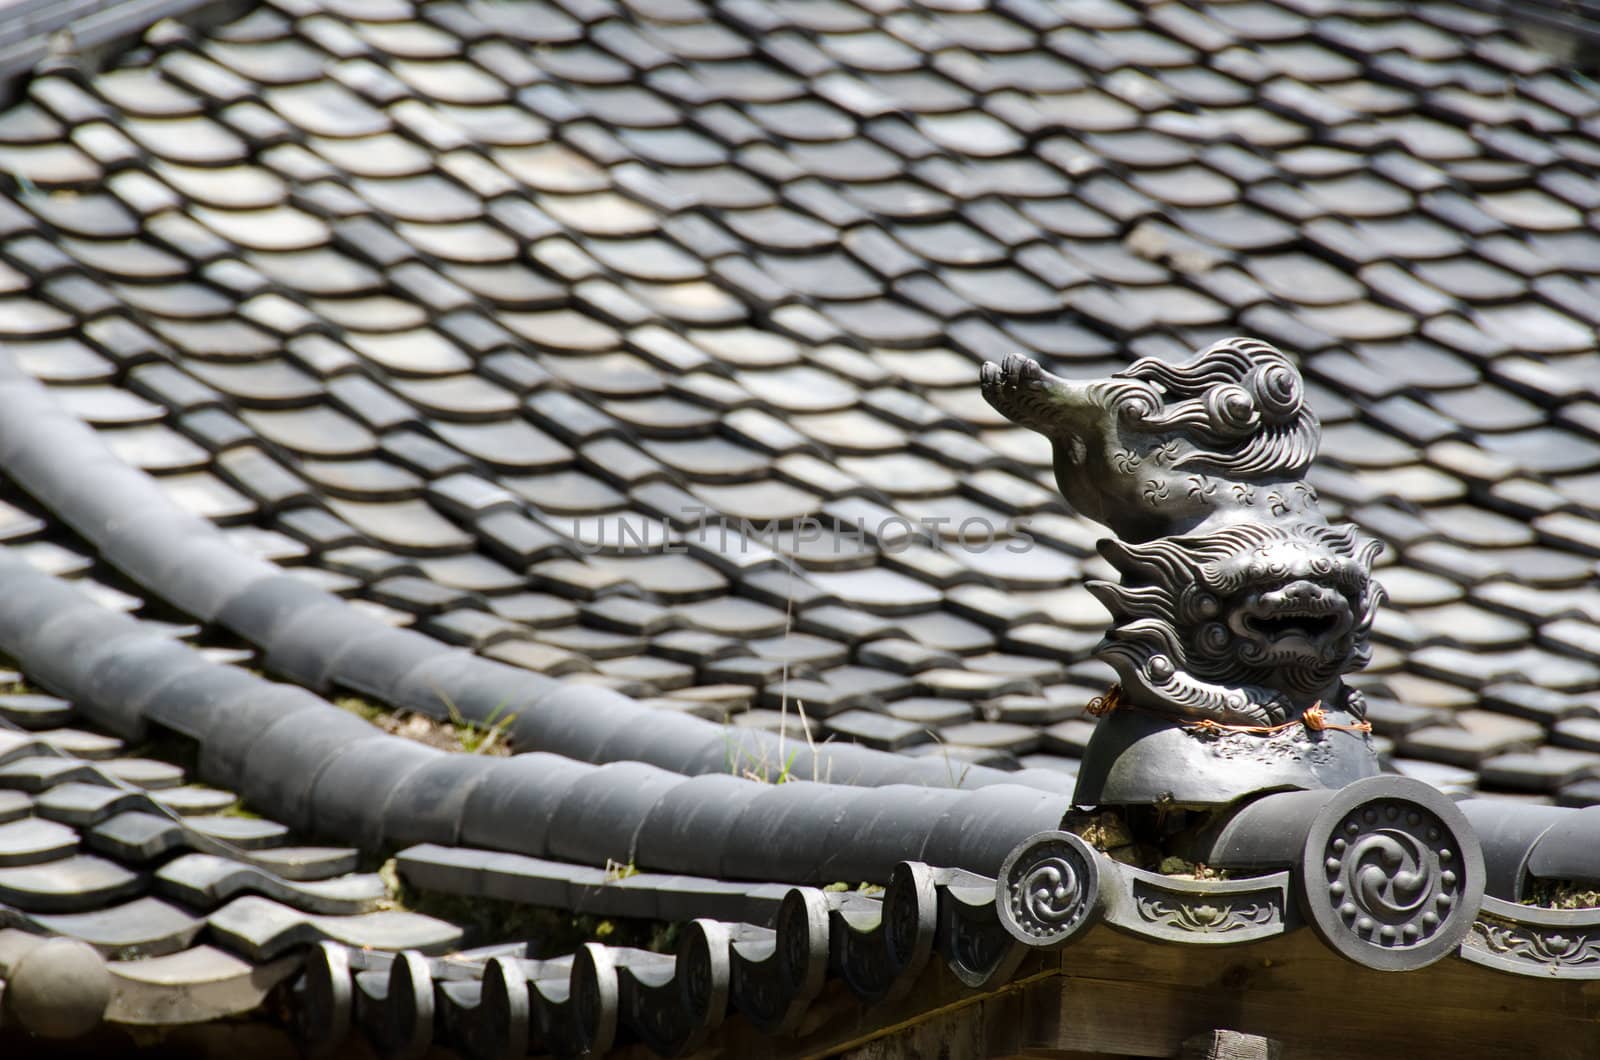 Detail of the roof of a japanese temple with Komainu figure